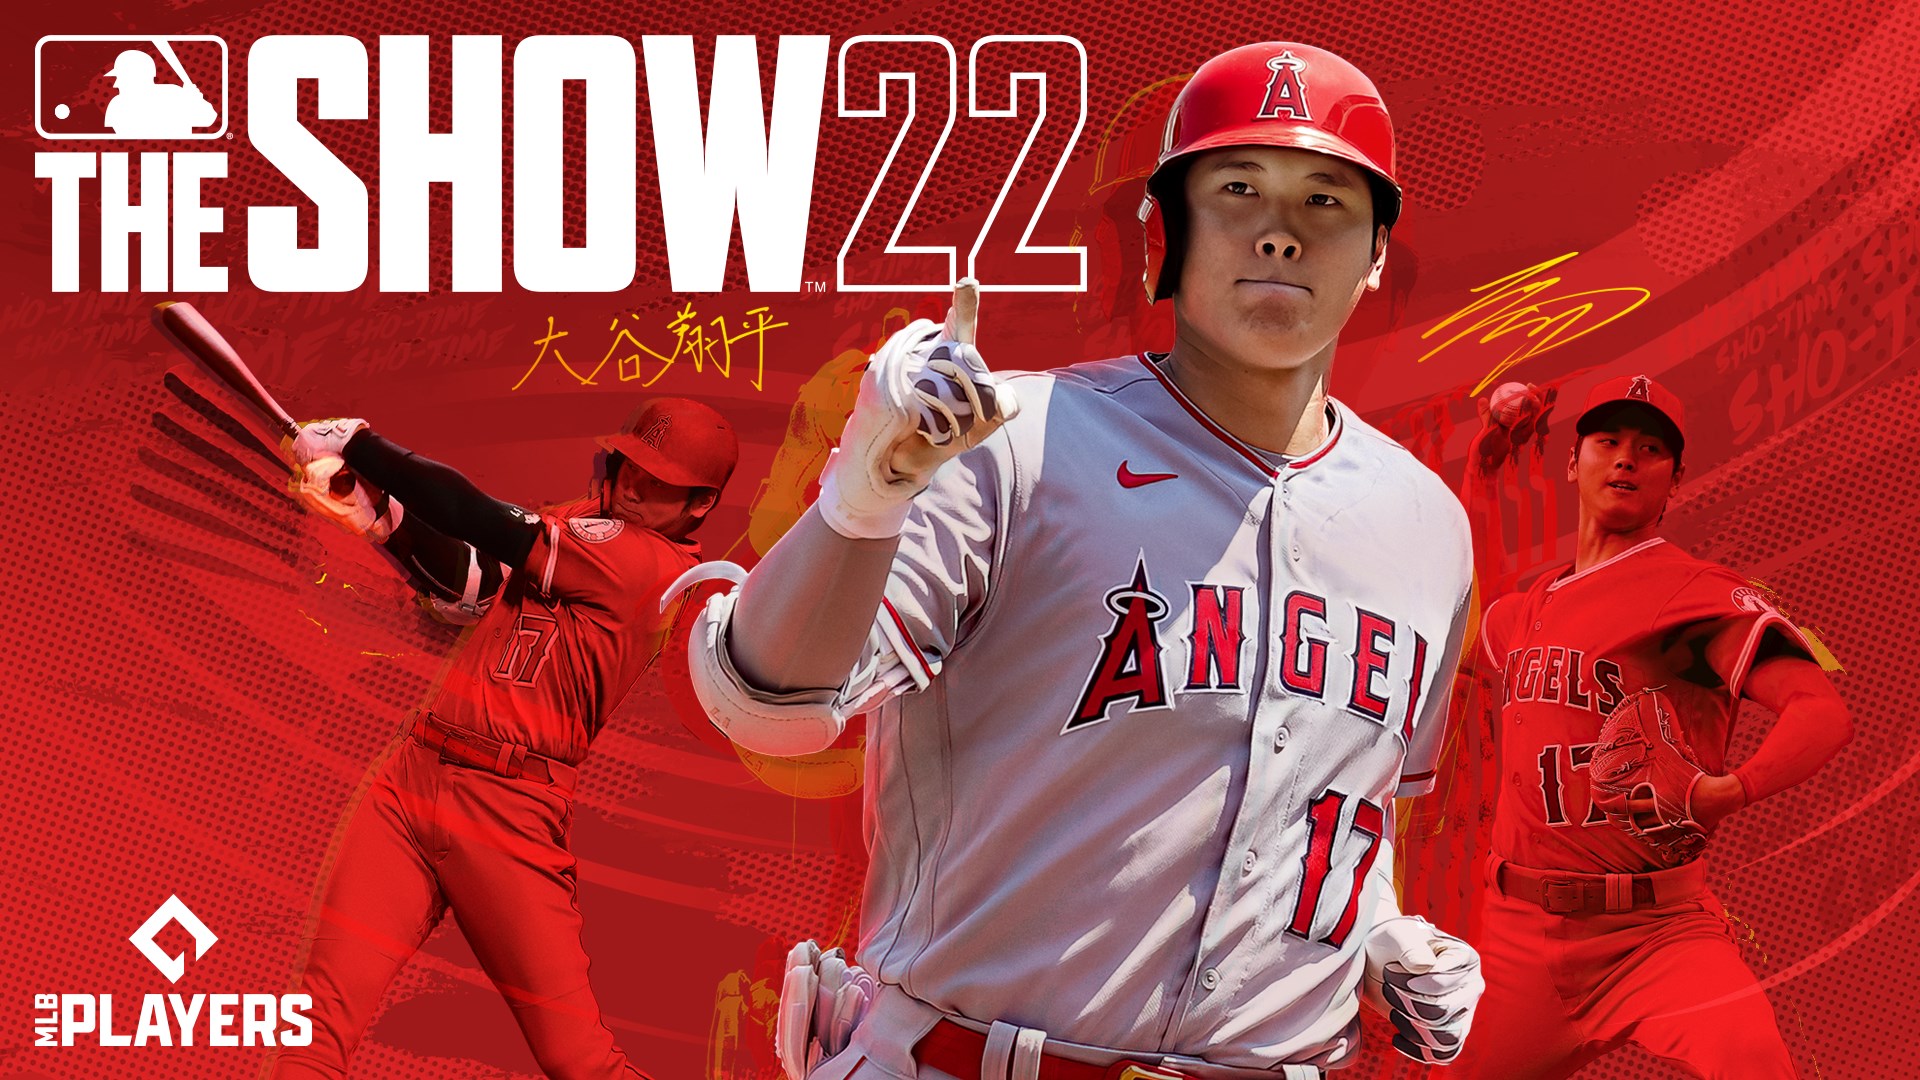 Video For MLB The Show 22 Is Now Available For Digital Pre-order And Pre-download On Xbox One And Xbox Series X|S